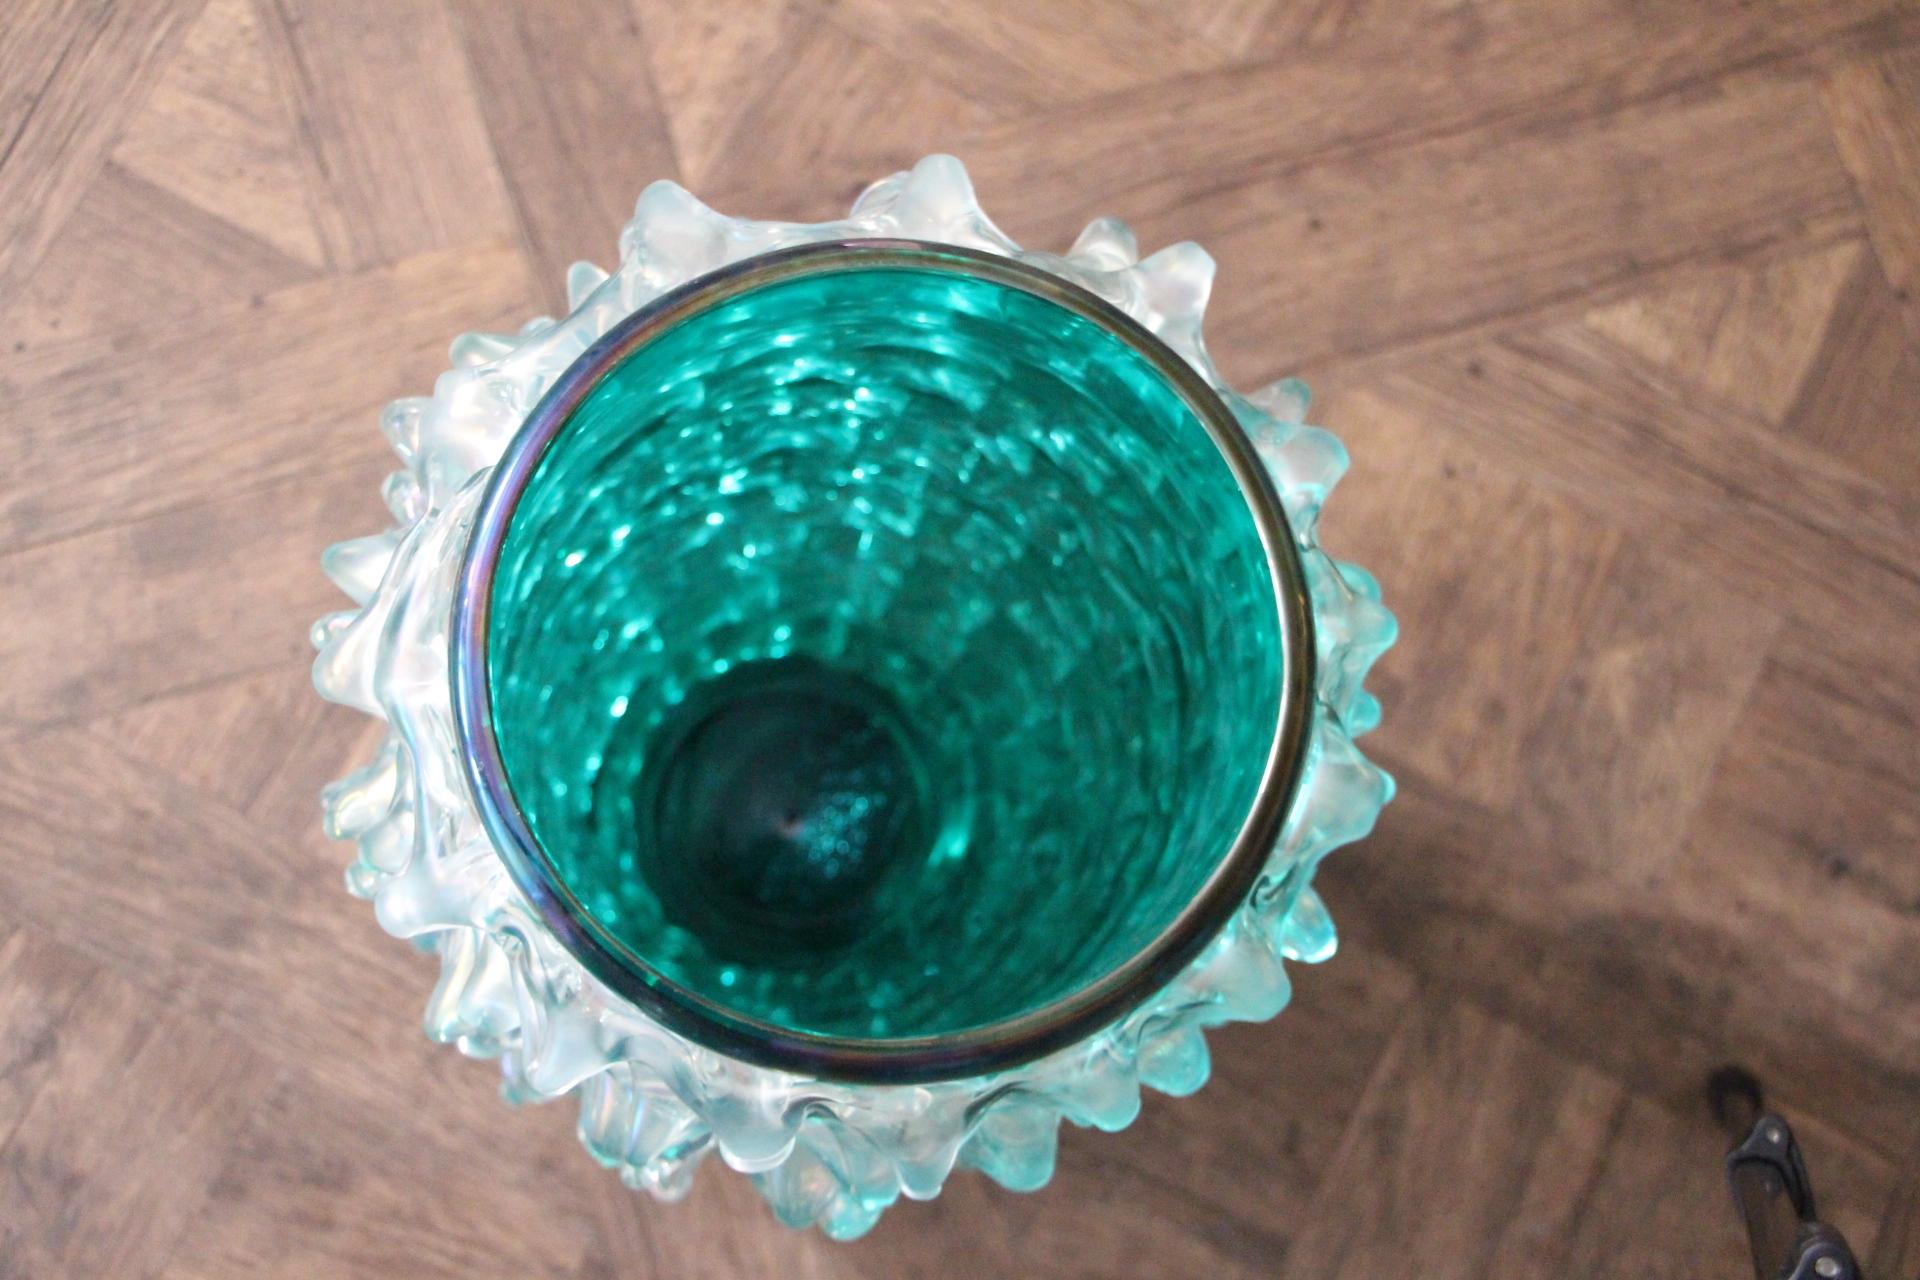 Italian Tall Vase in Blue-Green Iridescent Murano Glass with Rostrato Spikes Decor For Sale